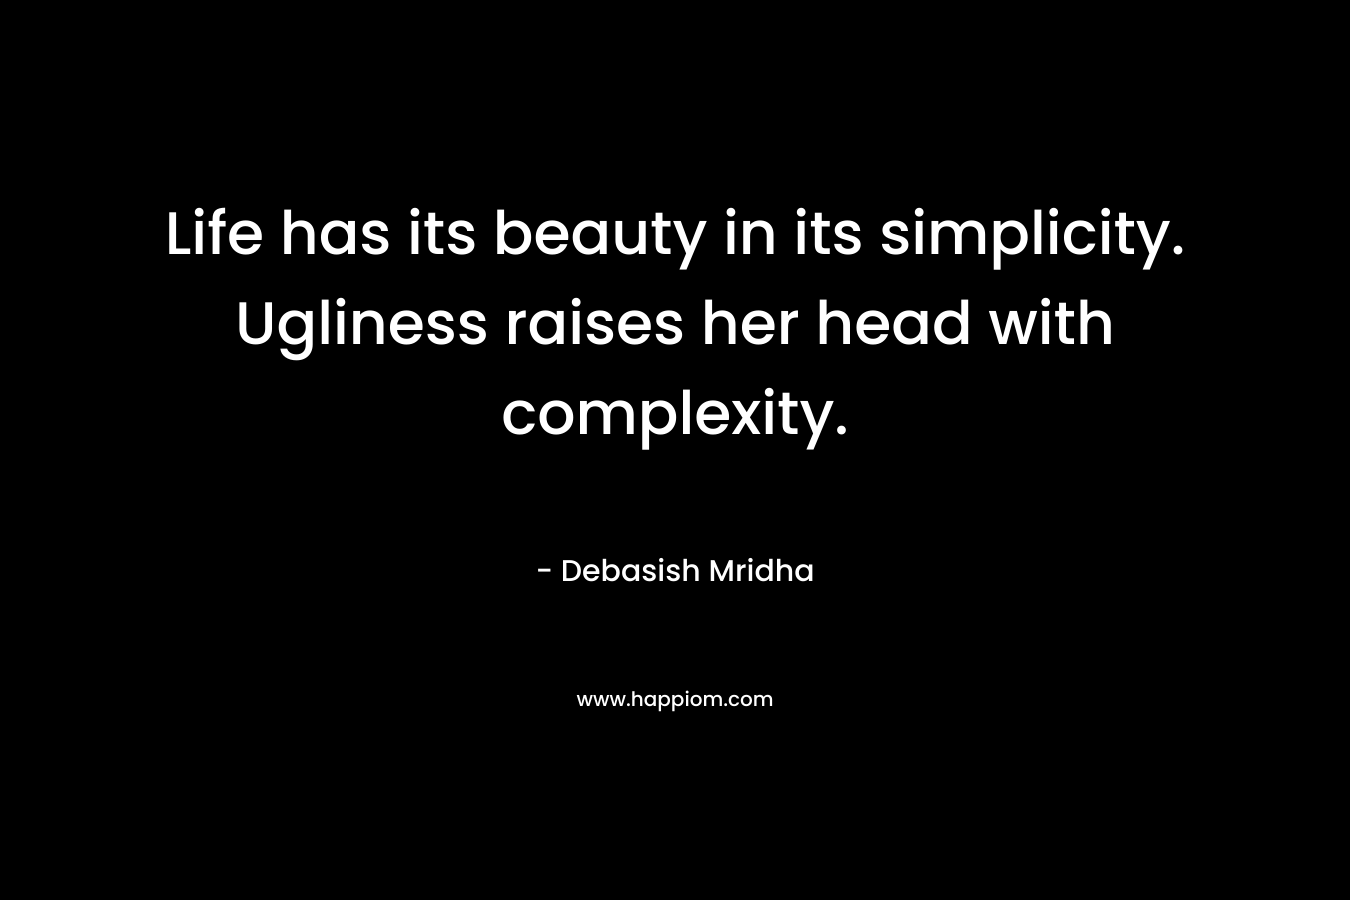 Life has its beauty in its simplicity. Ugliness raises her head with complexity.